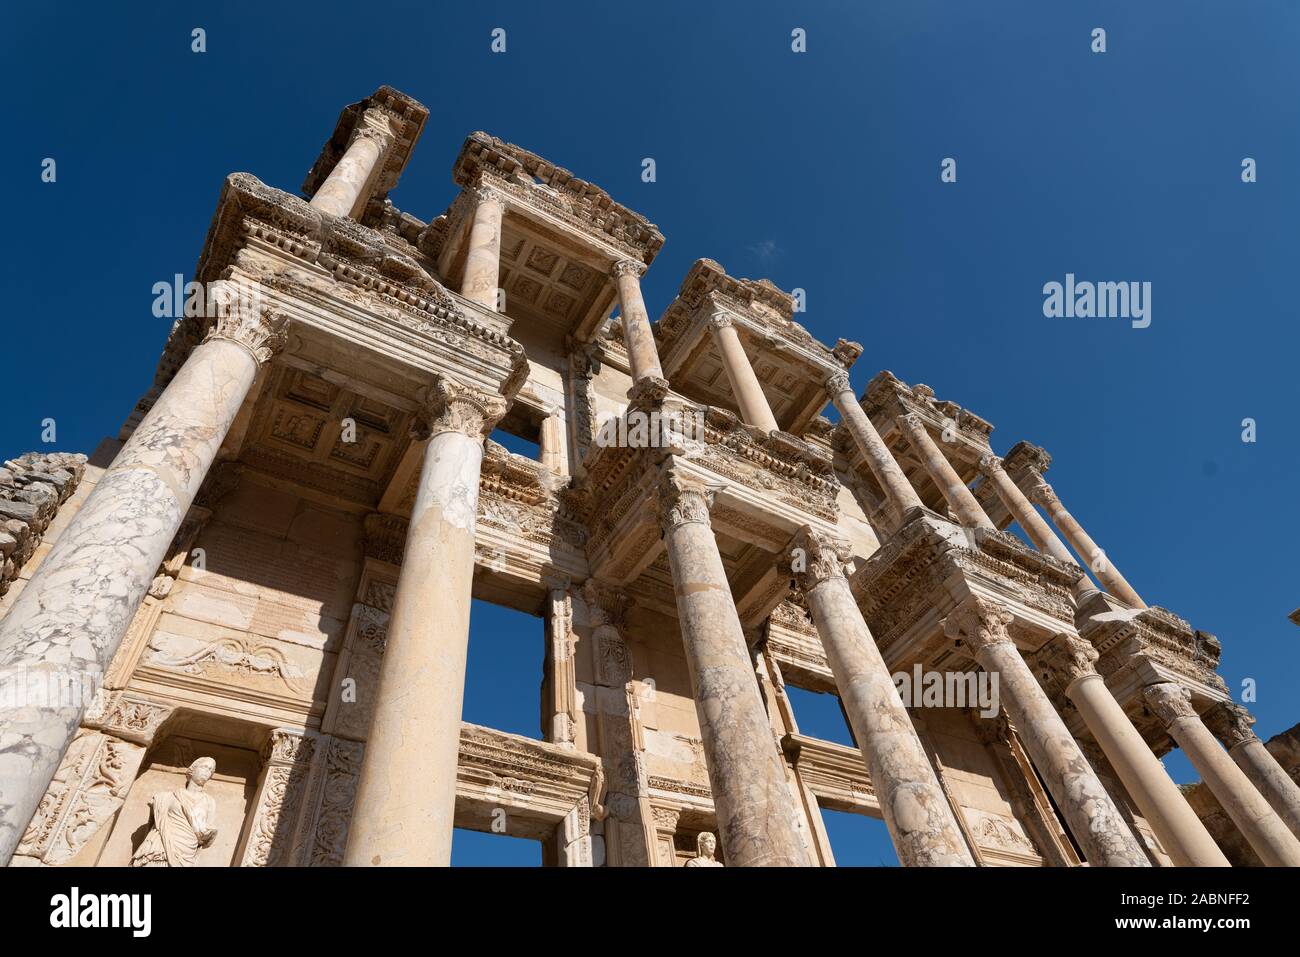 Library of Celsus, Ruins of ancient Ephesus, Turkey Stock Photo